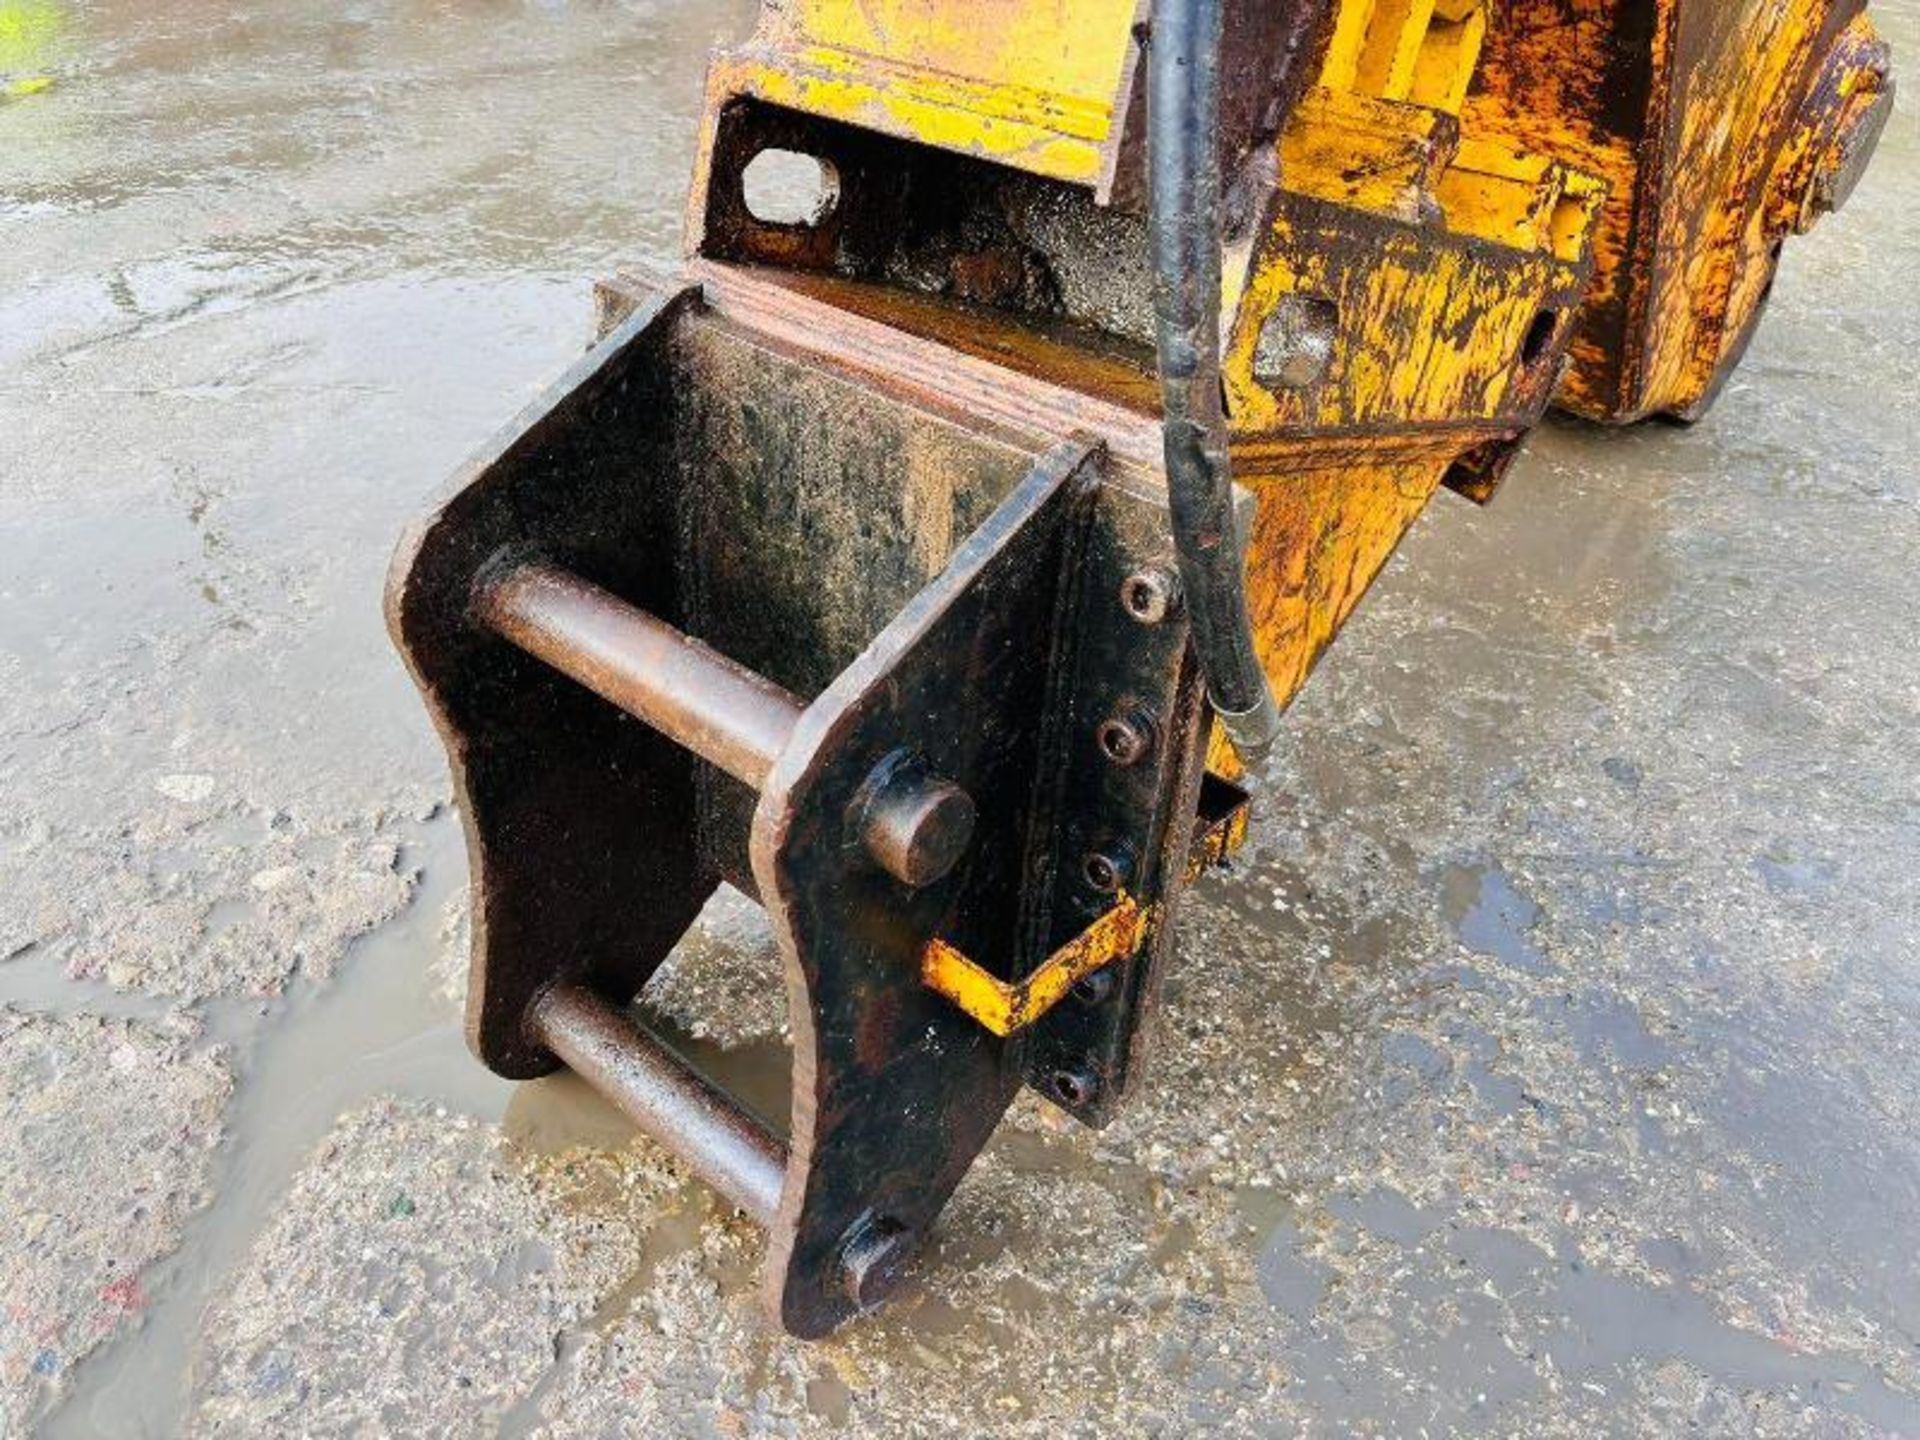 HYDRAULIC DEMOLITION SHEAR TO SUIT 10-12 TON EXCAVATOR - Image 7 of 11